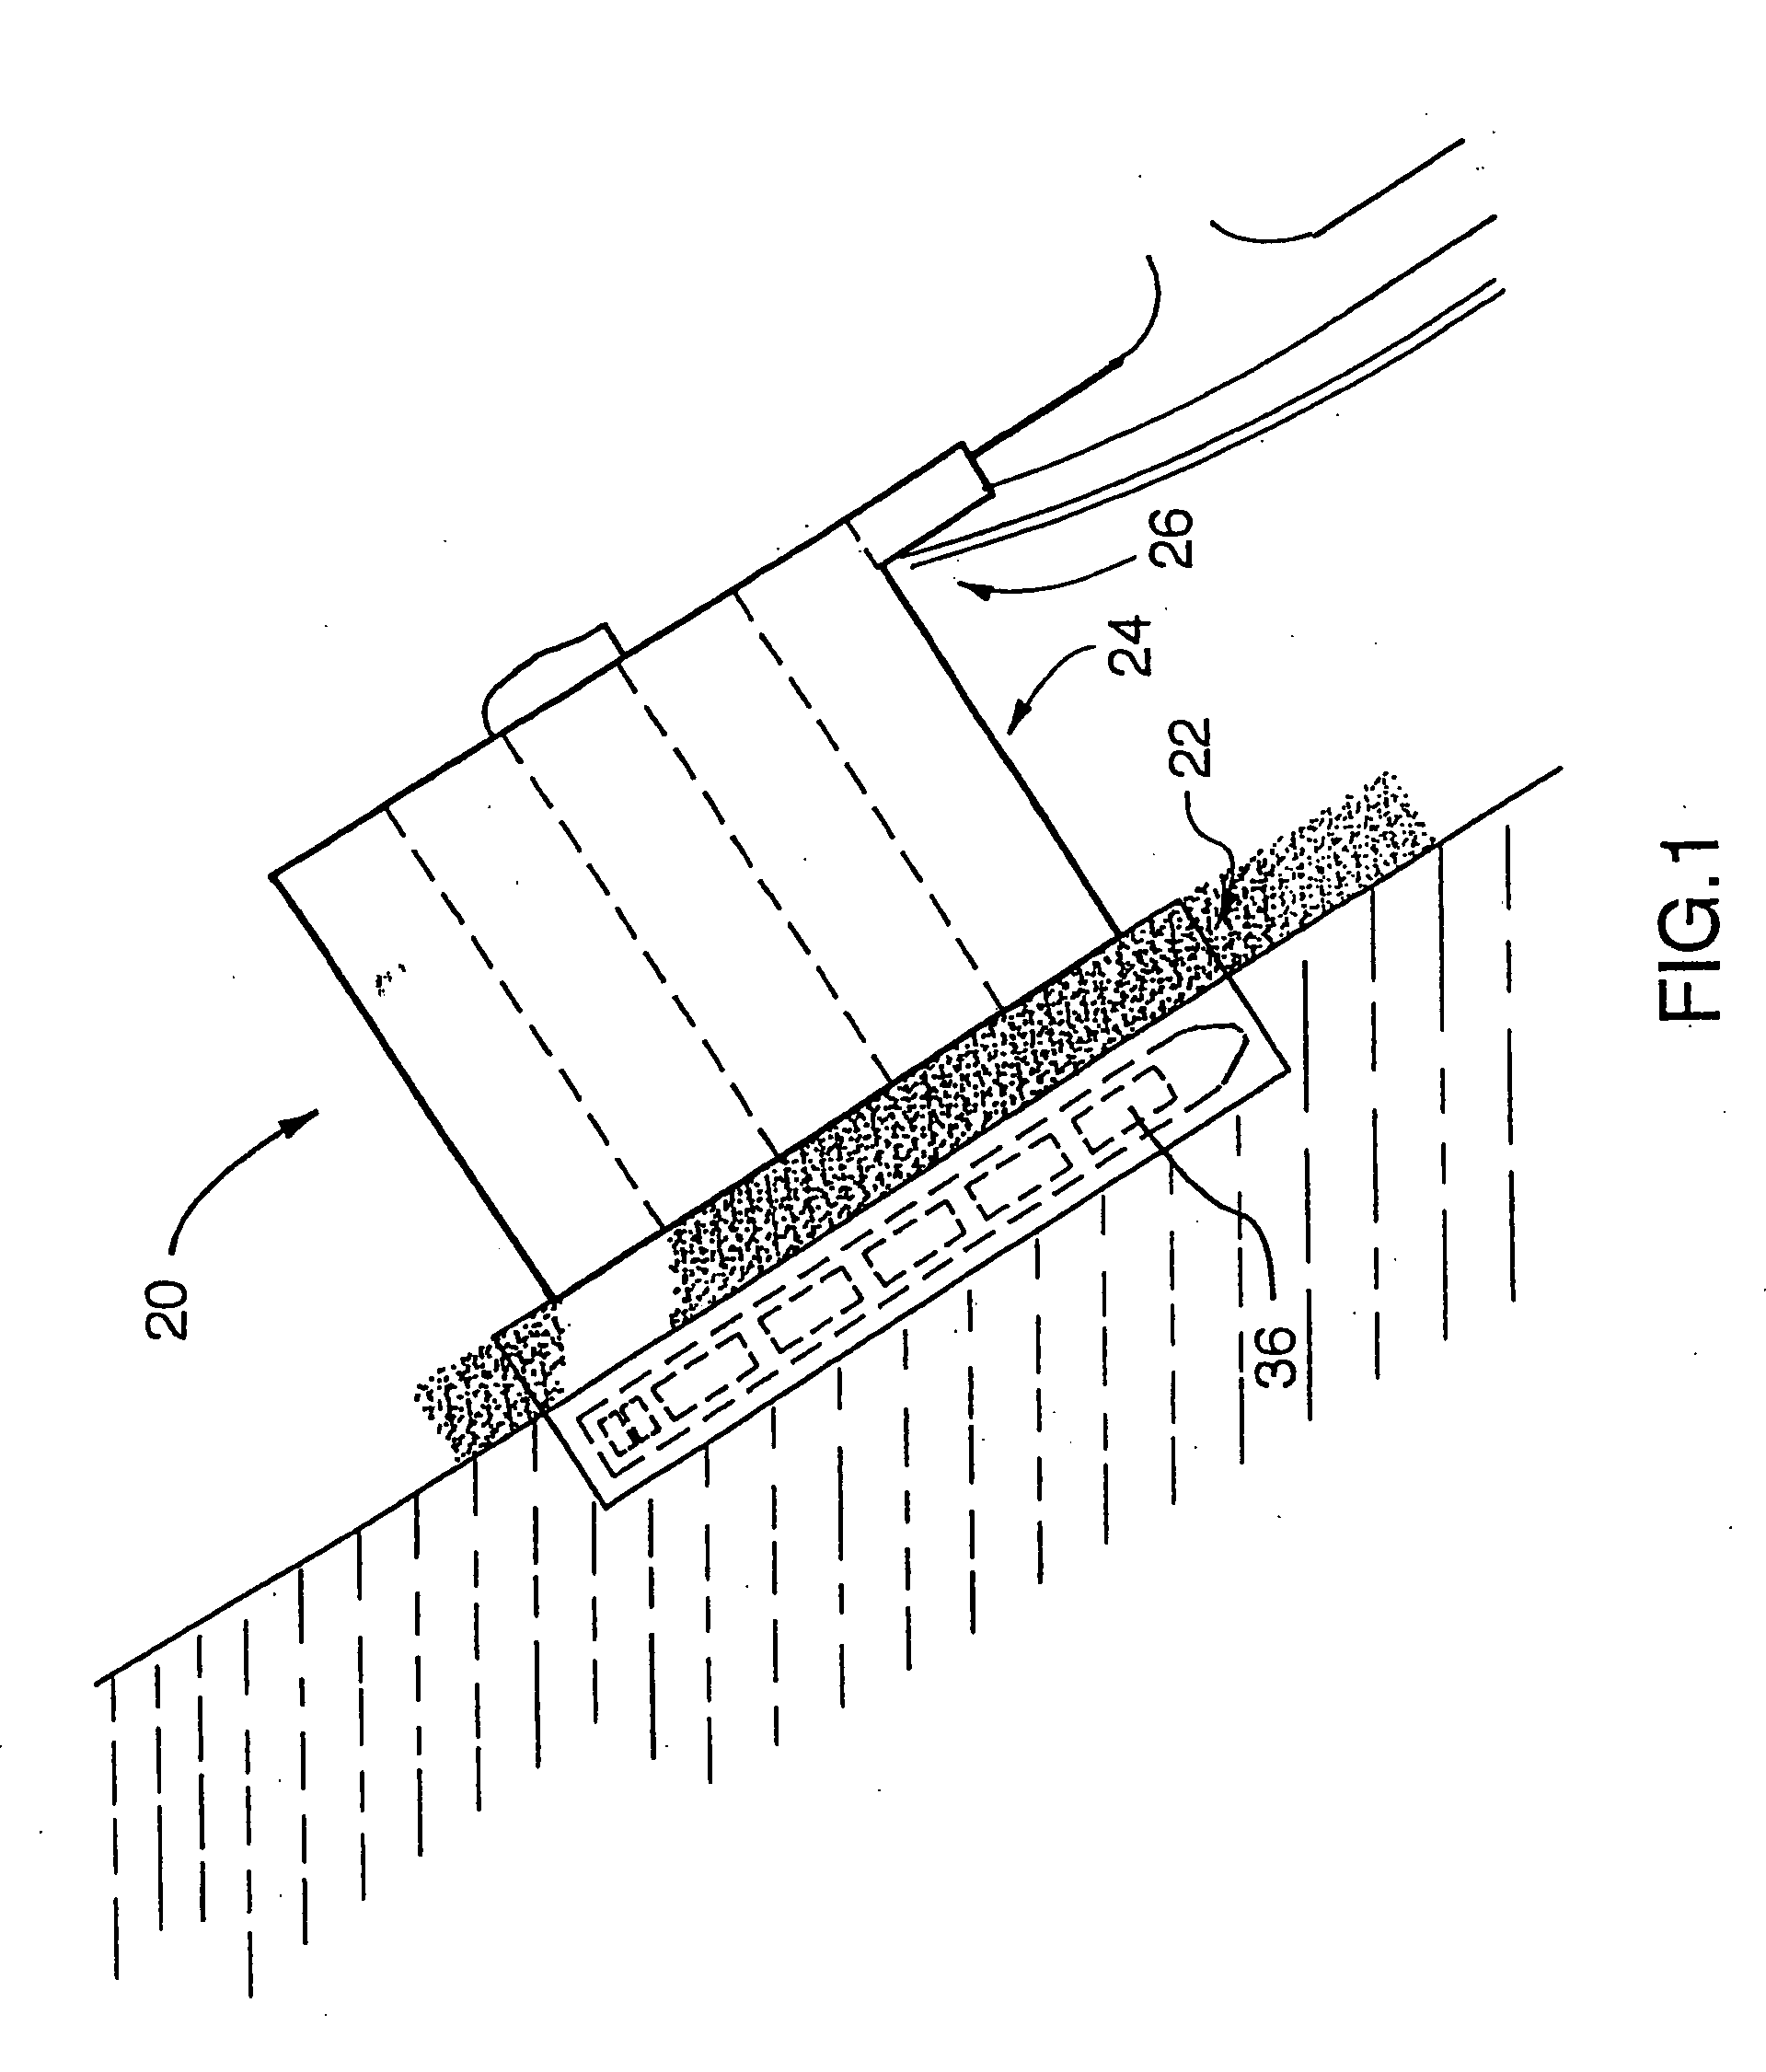 Process for handling cargo and cargo handling facility